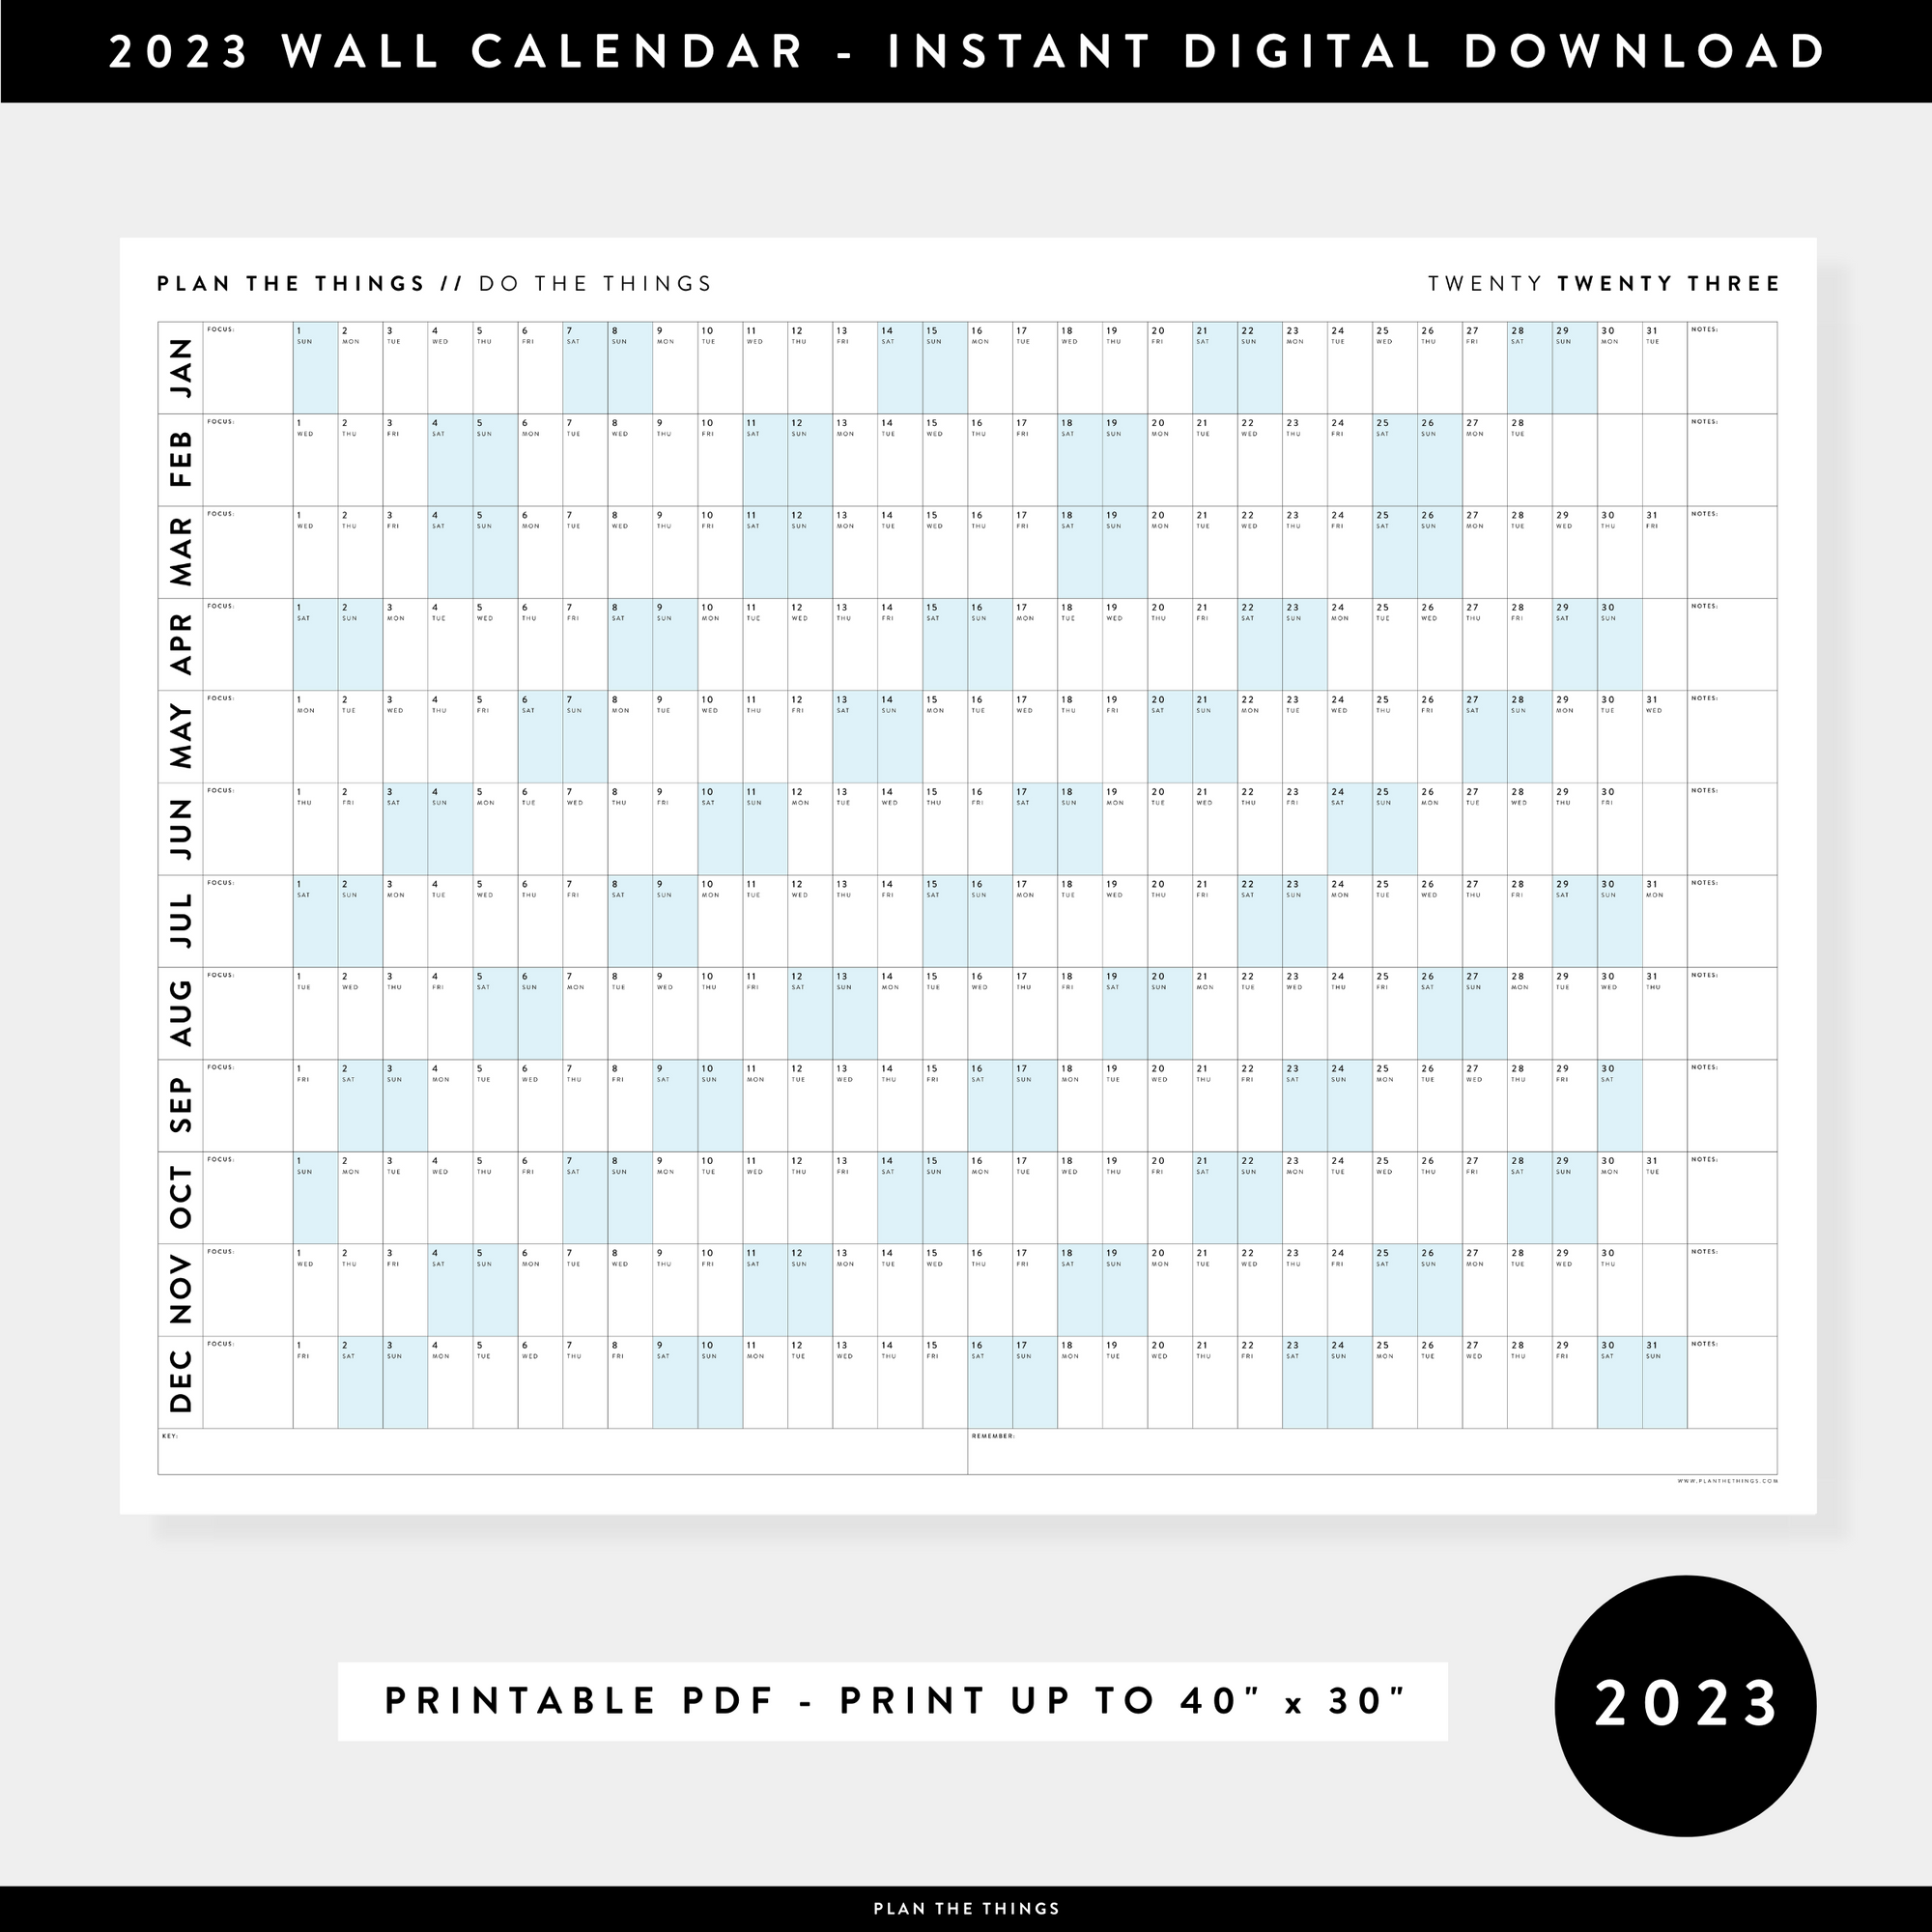 PRINTABLE HORIZONTAL 2023 WALL CALENDAR WITH BLUE WEEKENDS - INSTANT DOWNLOAD